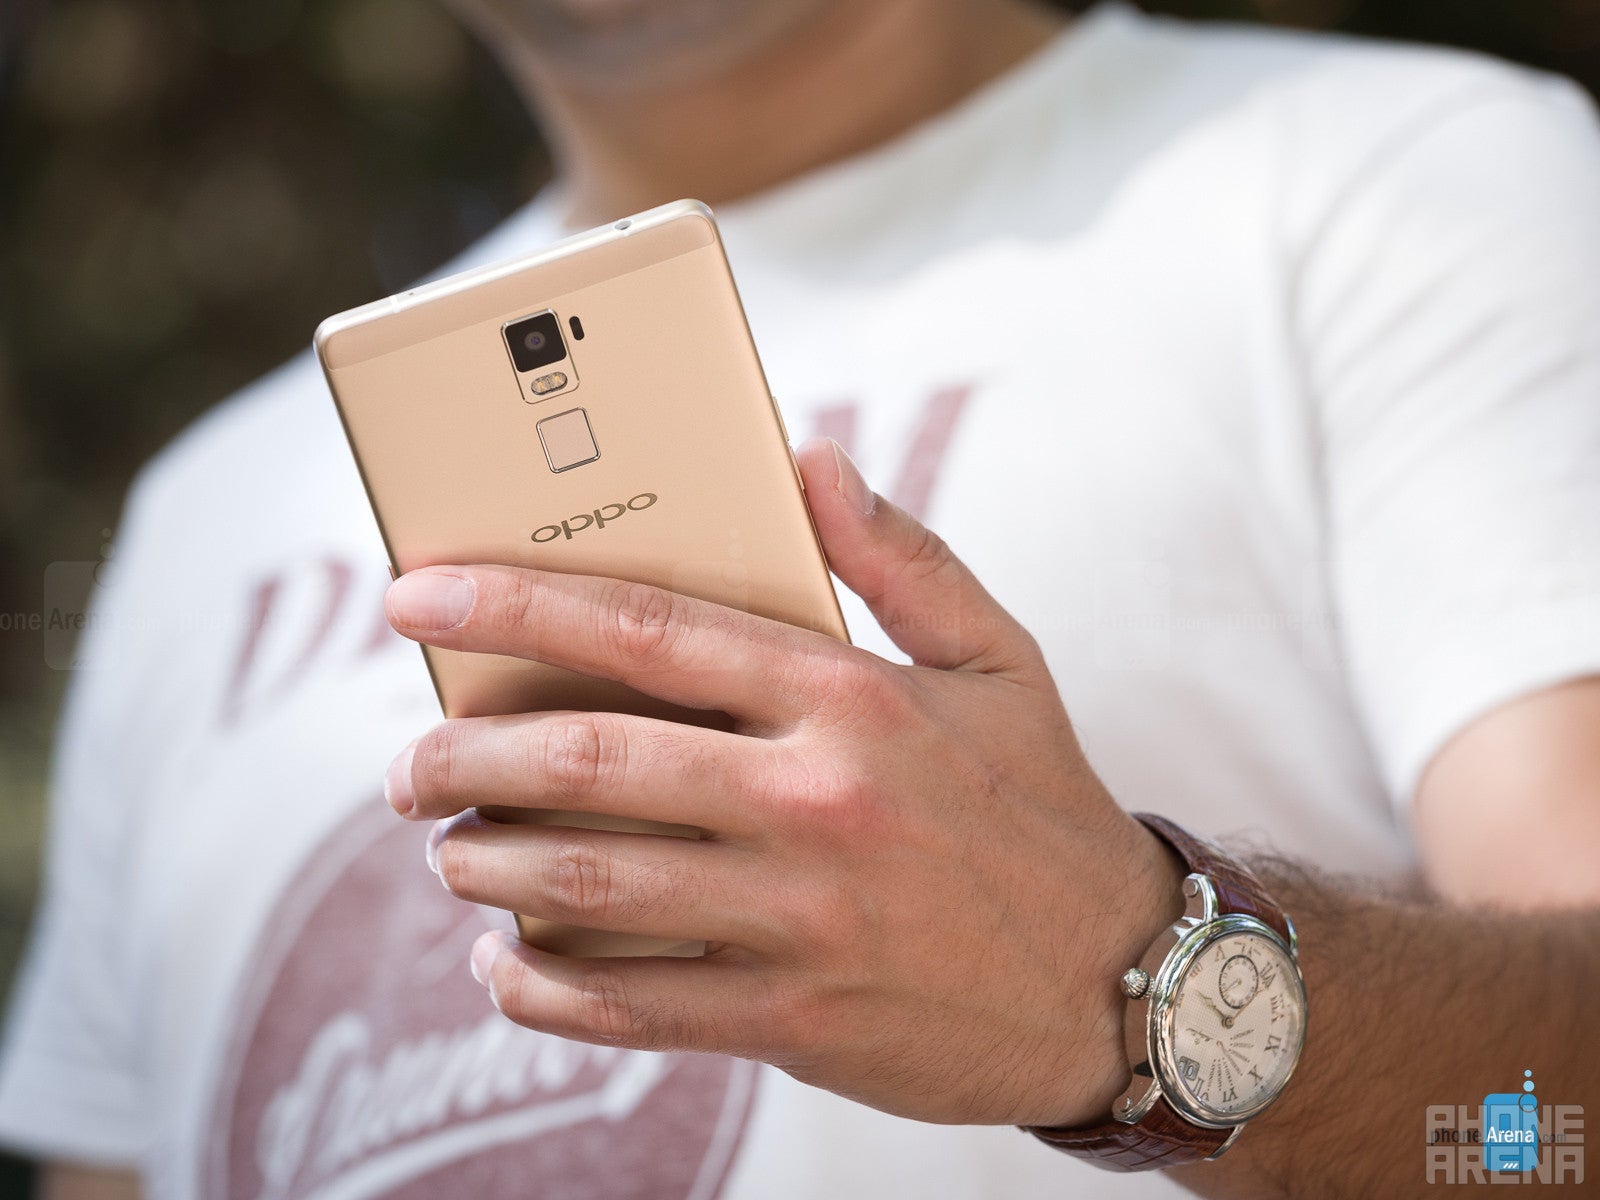 OPPO R7 Plus Review